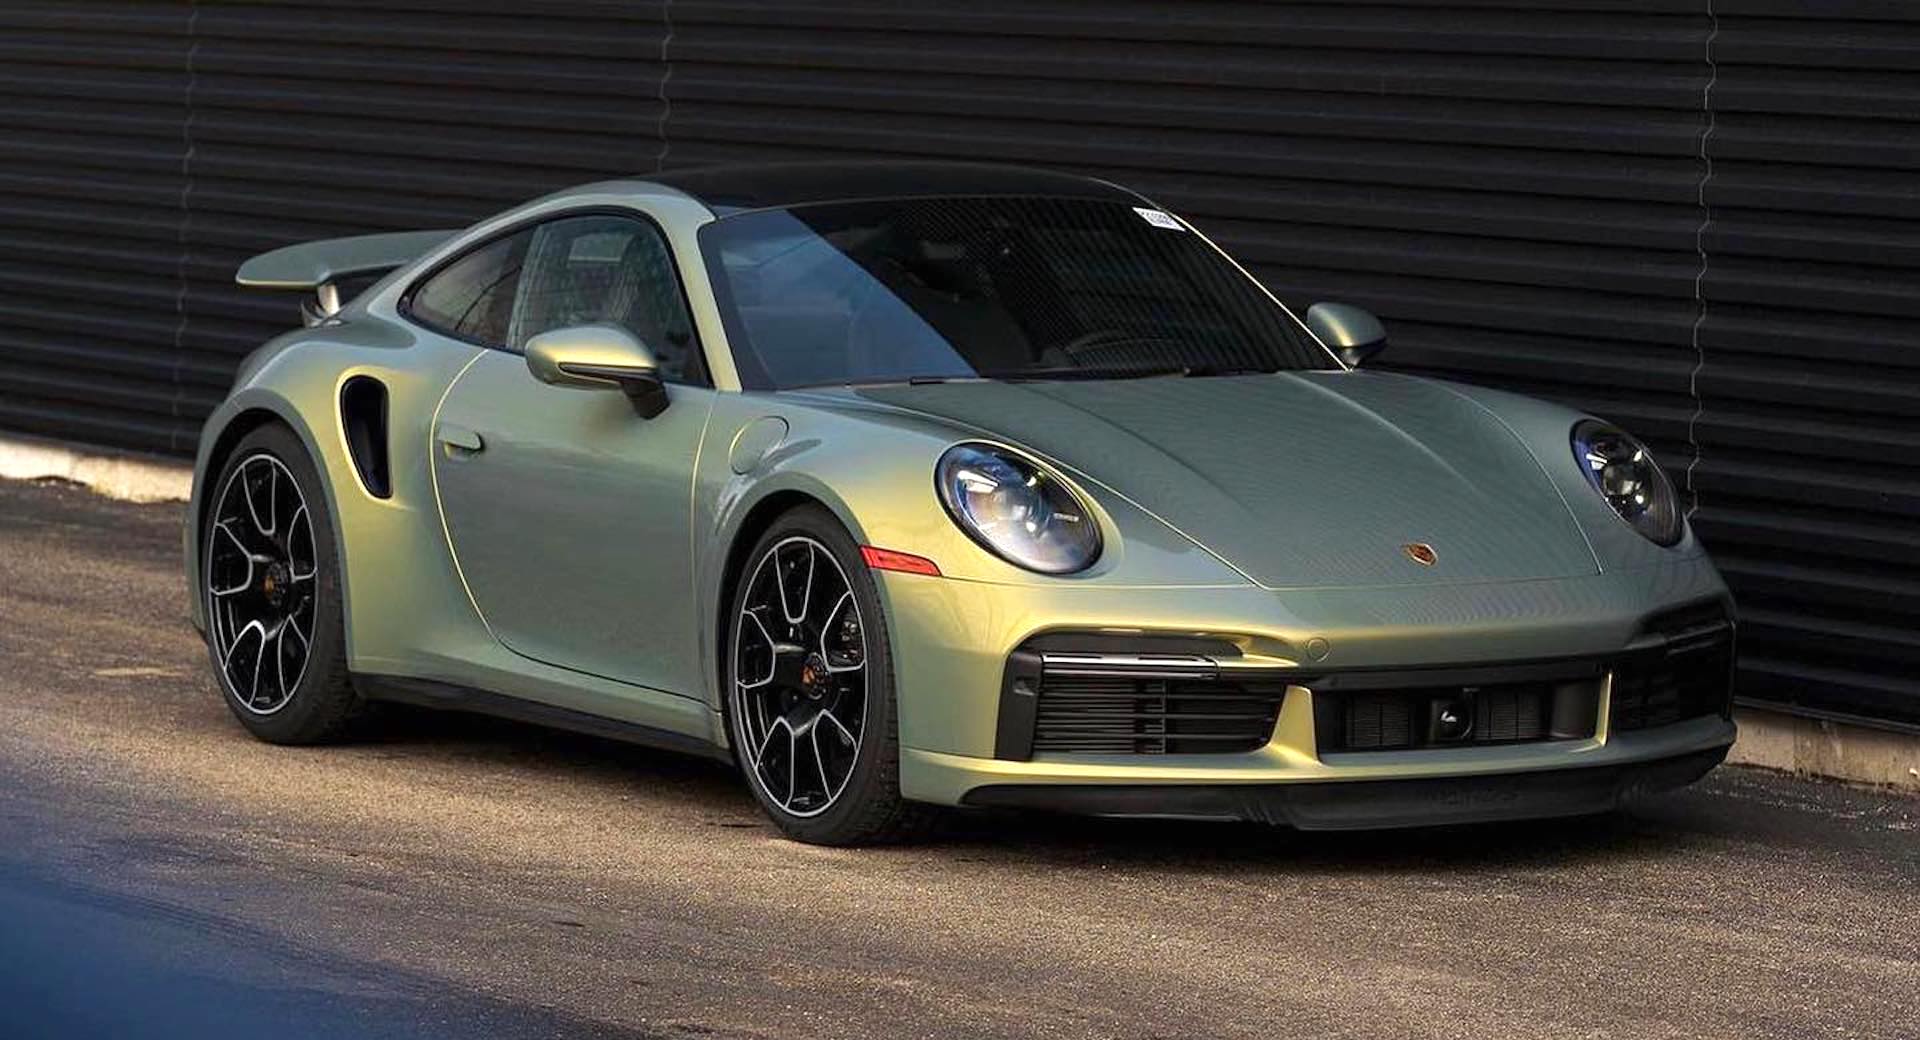 Dealer Puts A 100,000 Markup On New Porsche 911 Turbo S That Has